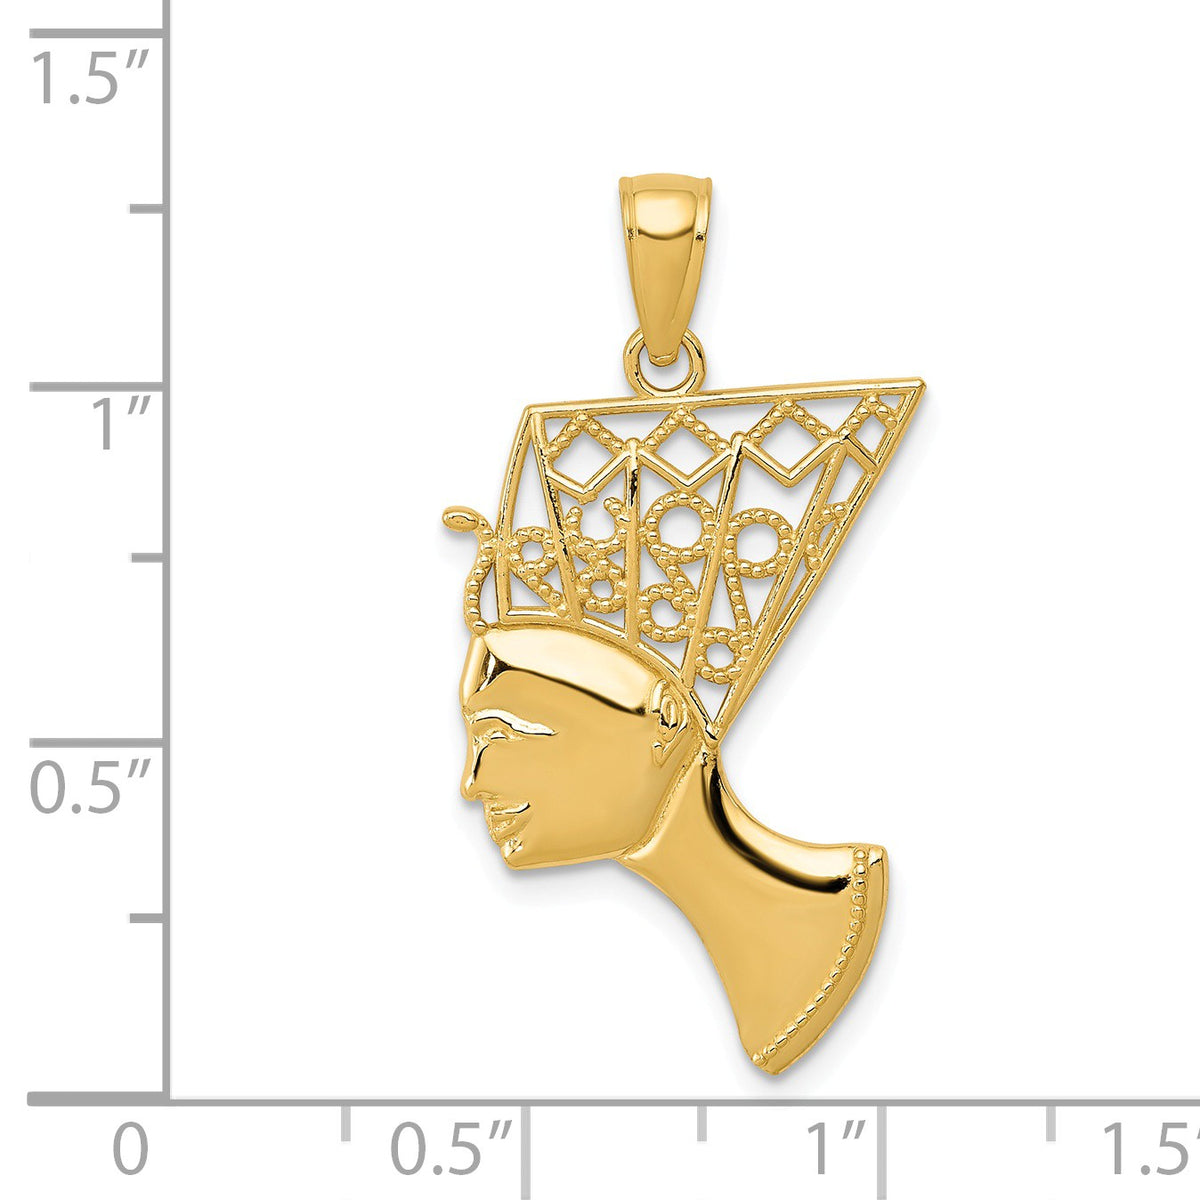 Alternate view of the 14k Yellow Gold Filigree Egyptian Nefertiti Profile Pendant, 18 x 31mm by The Black Bow Jewelry Co.